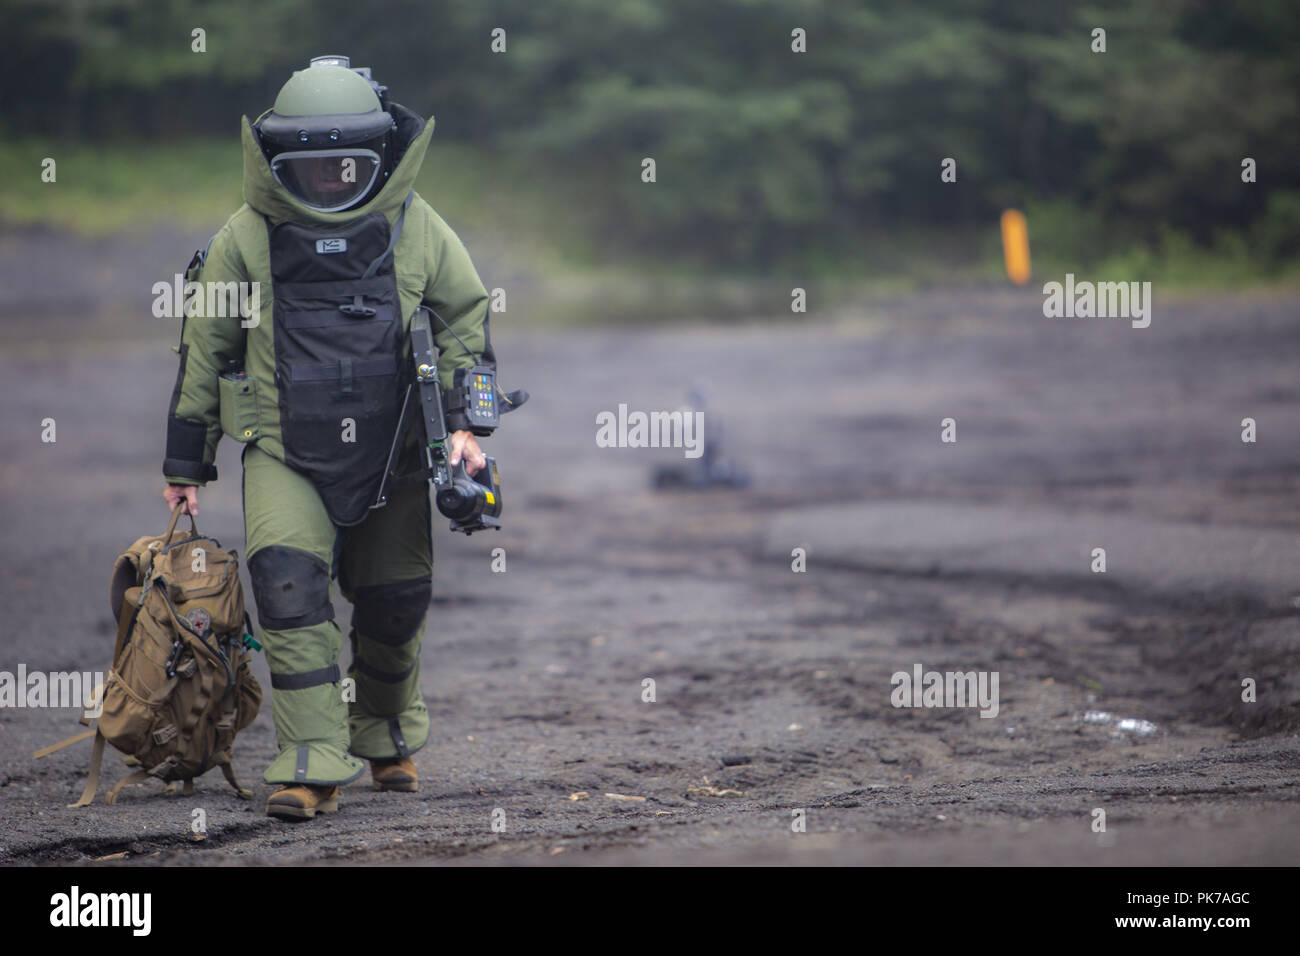 Camp Fuji, Shizuoka, Japan. 10th Sep, 2018. Sgt. Scott N. Schaller walks back from X-raying a suitcase Sept. 5, 2018 at Camp Fuji, Japan. Explosive Ordnance Disposal technicians use an X-ray to determine if they can safely inspect items. EOD Company Marines validated proficiency and prepared for worldwide mission deployment in support of III Marine Expeditionary Force by testing their ability to disable and dispose of explosives. Schaller, a native of Easton, Pennsylvania, is with EOD Company, 9th Engineer Support Battalion, 3rd Marine Logistics Group. (U.S. Marine Corps photo by Lance C Stock Photo